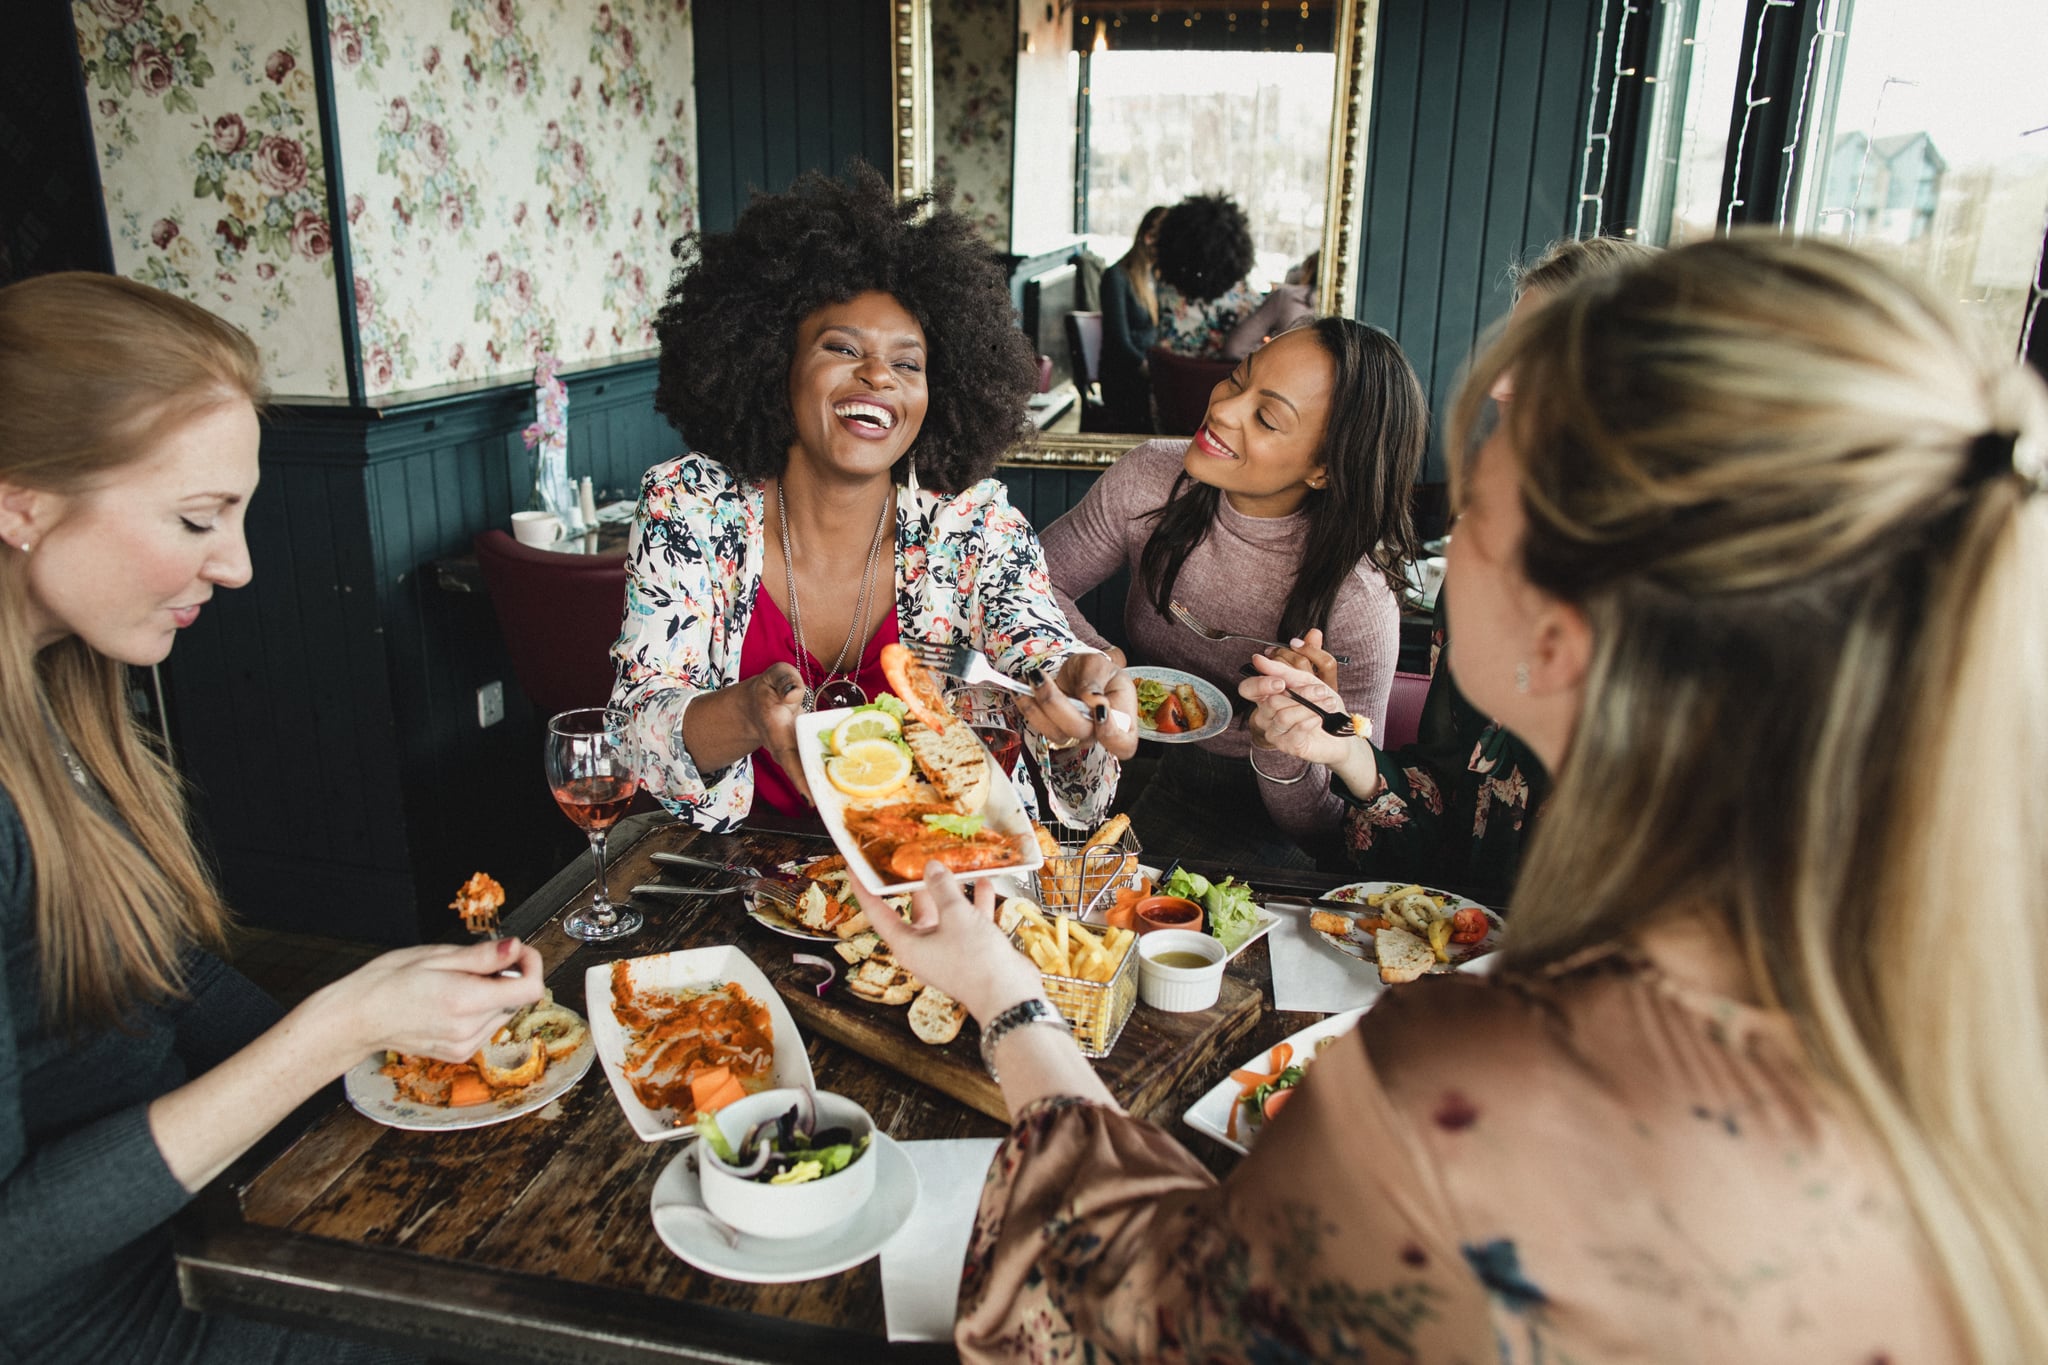 A group of women are enjoying a meal in a restaurant with rose wine. They have a king prawns sharing platter , one woman can be seen passing her friend a plate of food. Mixed ethnic group